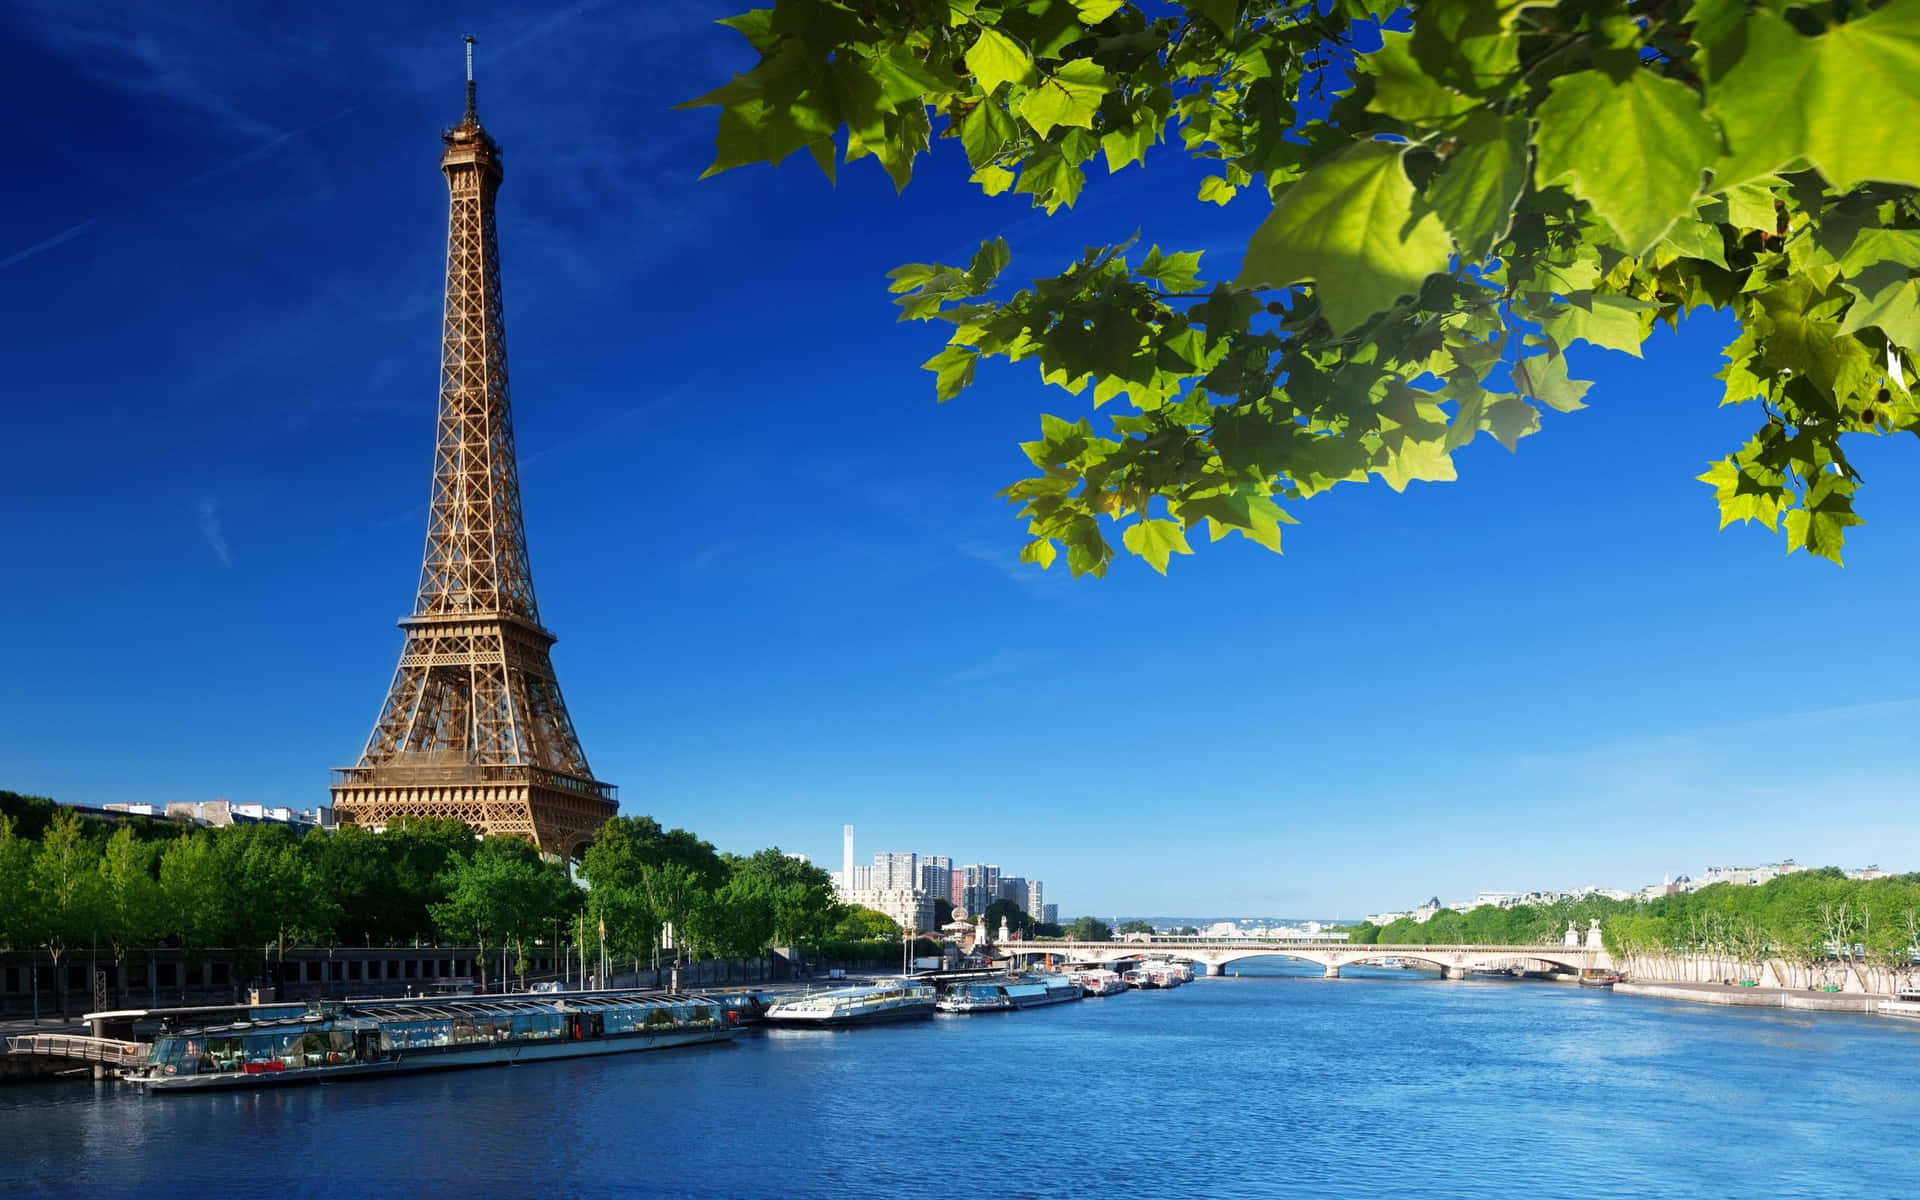 The Iconic Eiffel Tower of Paris